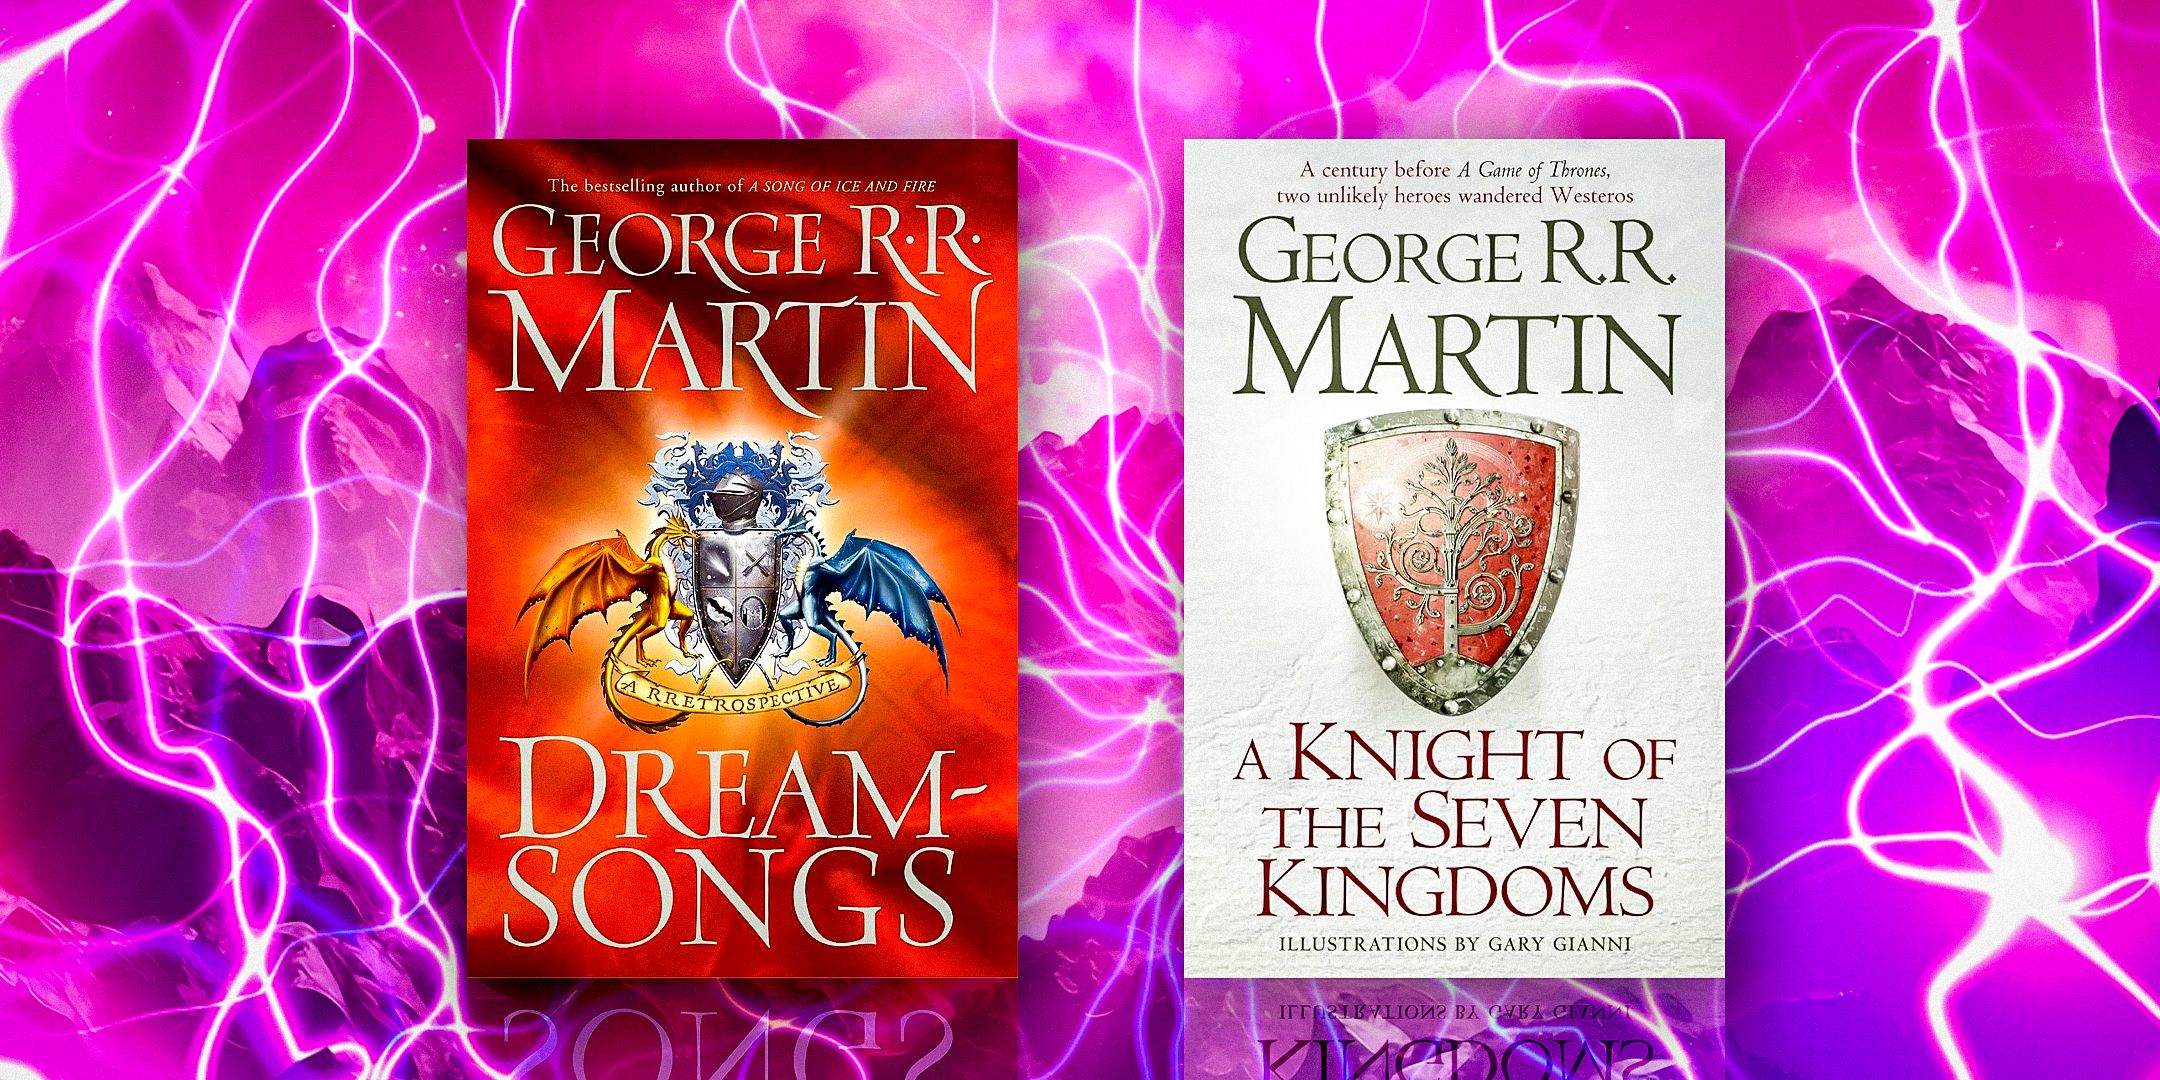 Covers of George R.R. Martin's Dreamsongs and A Knight of the Seven Kingdoms